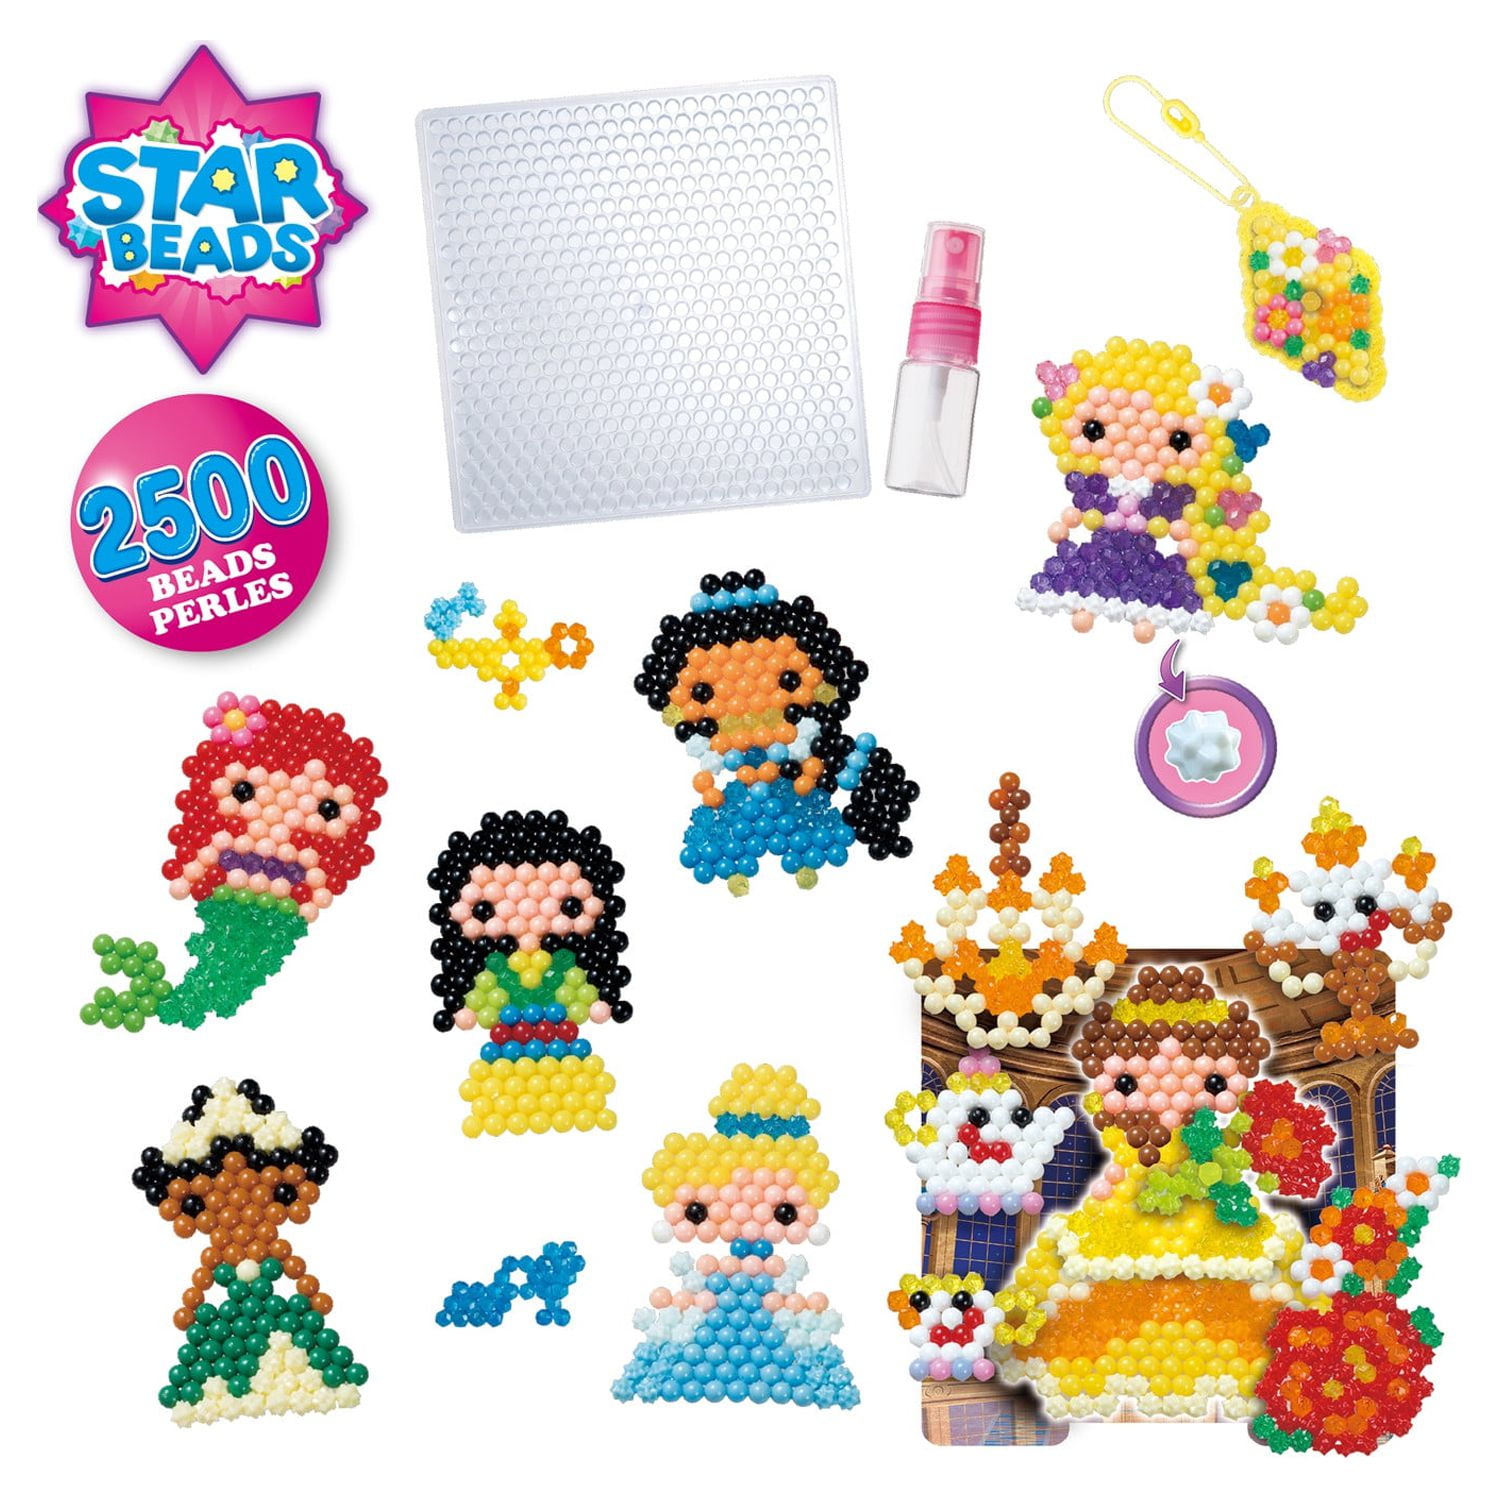 Aquabeads Disney Princess Character Set, Complete Arts & Crafts Kit for  Children - over 600 Beads to create your favorite Disney Princess Characters